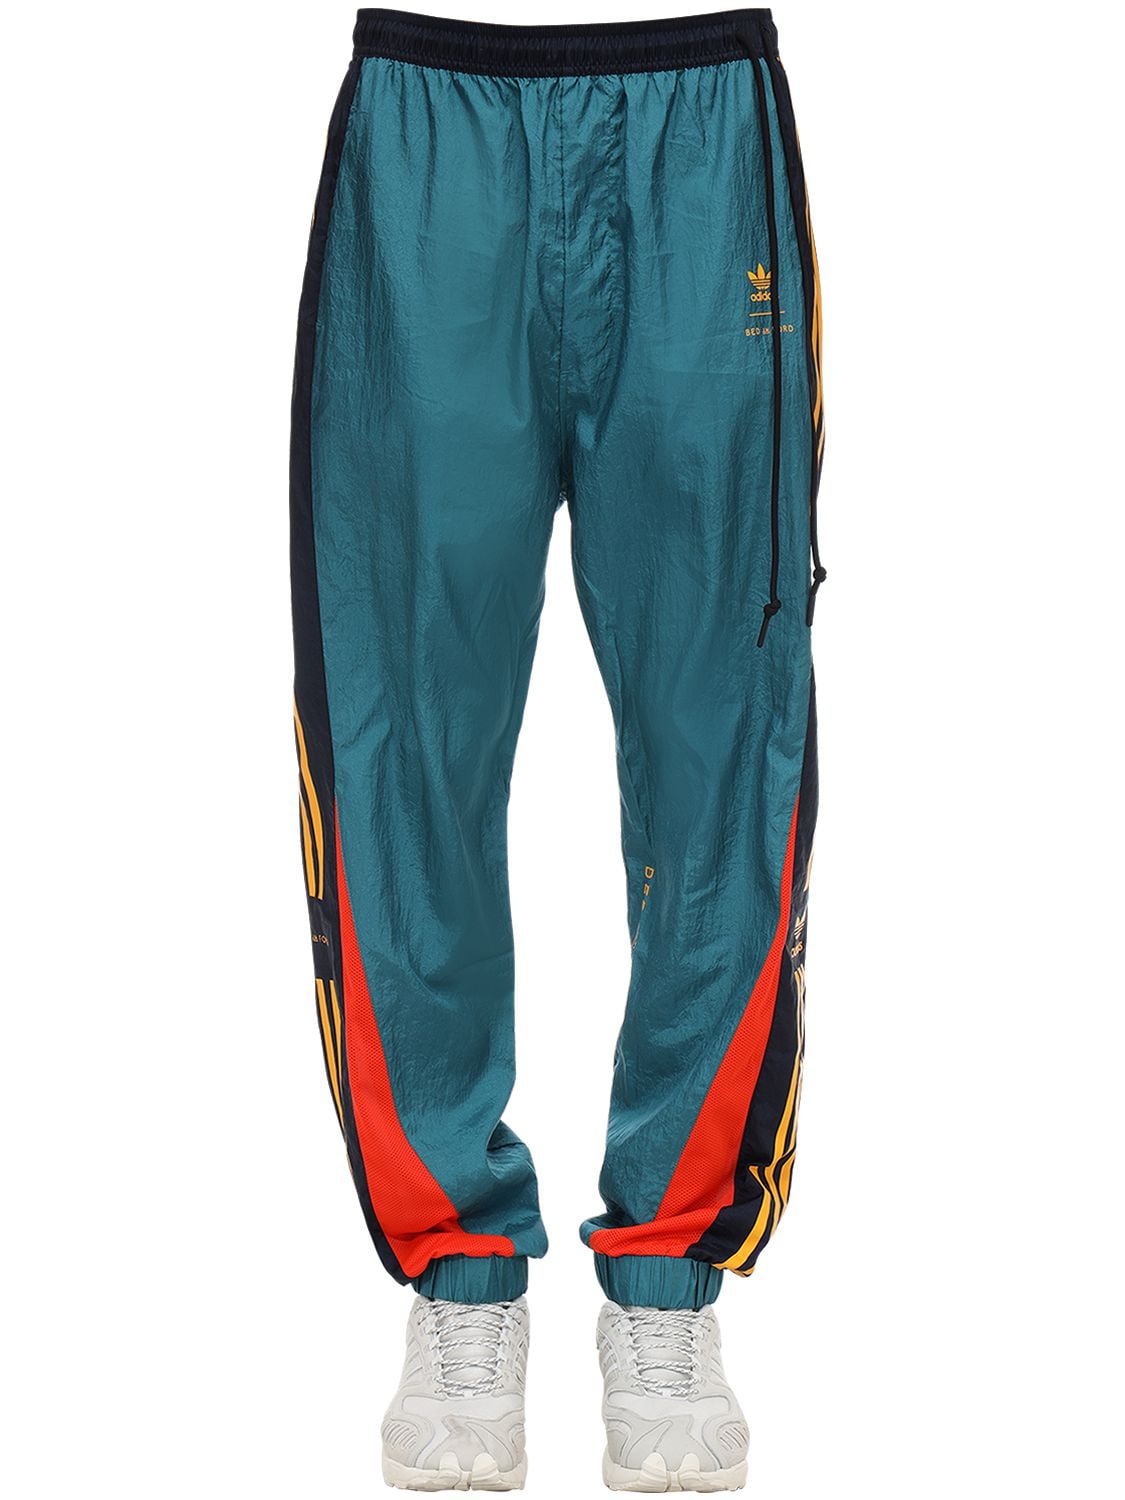 Adidas Originals Statement Bed J.w. Ford Track Pants In Rich Green